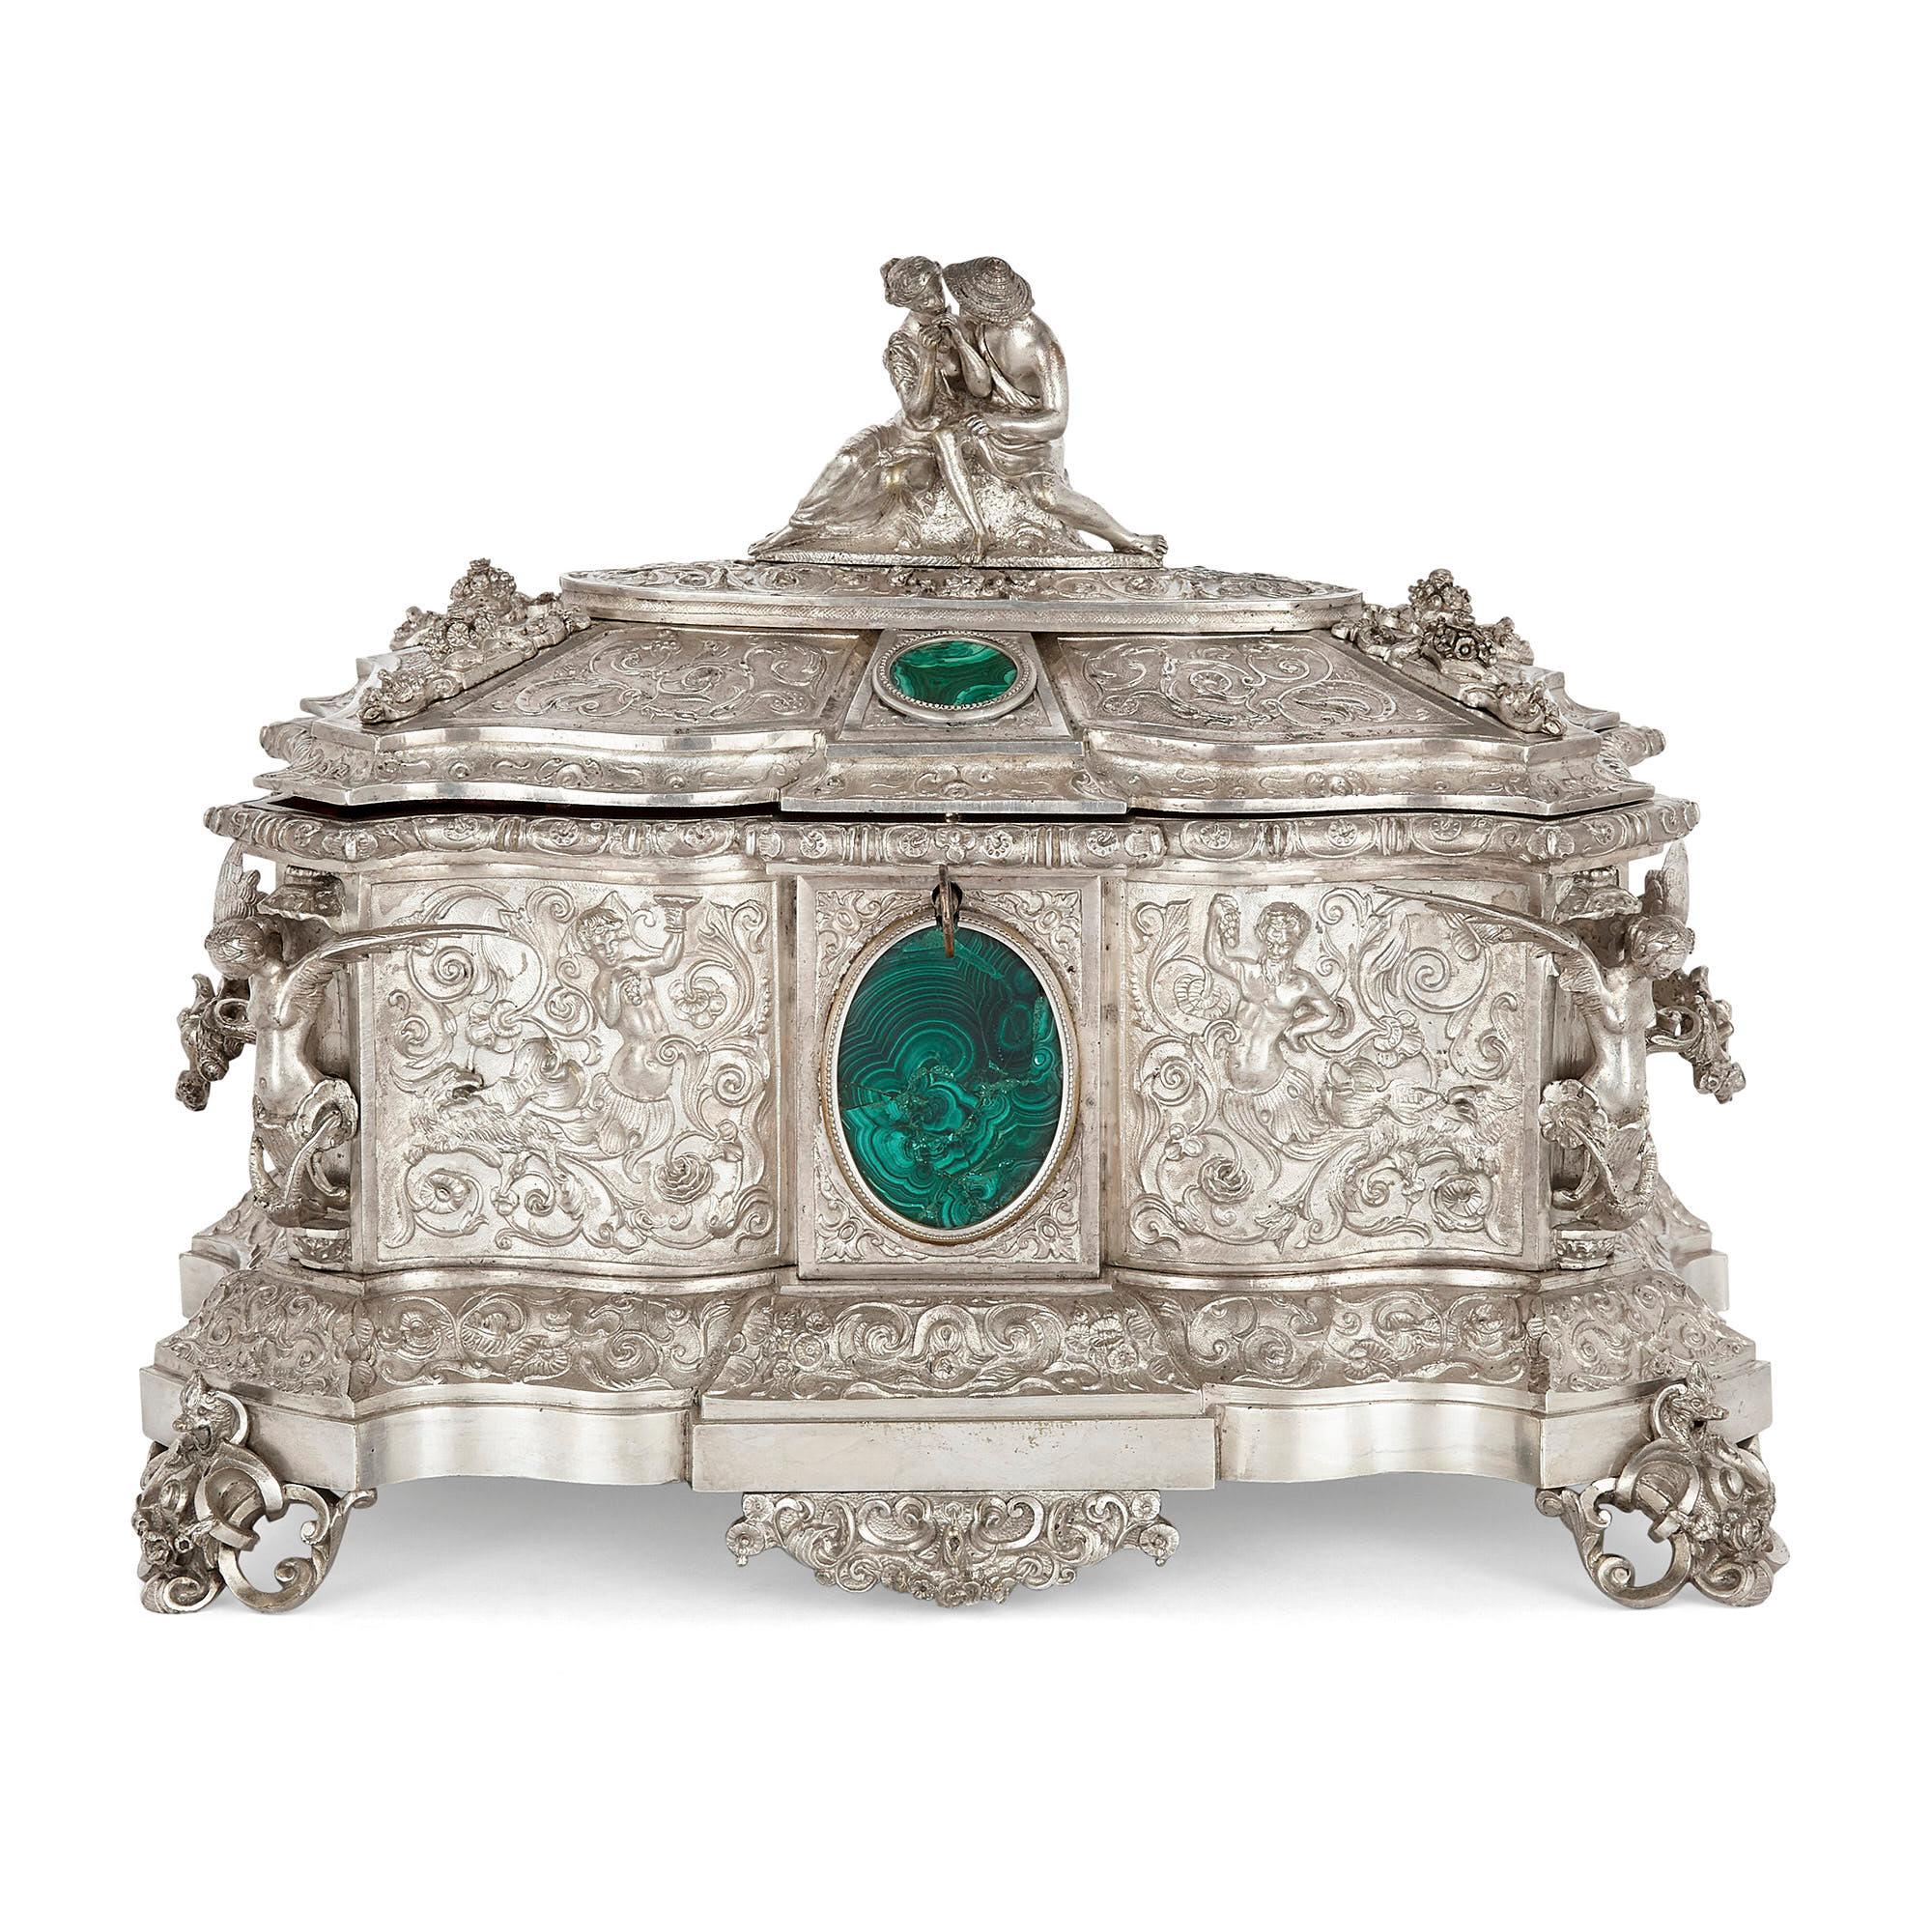 French antique malachite and silvered bronze casket
French, 19th century
Measures: Height 25cm, width 33cm, depth 20cm

This superb jewellery casket is crafted from deftly wrought silvered bronze. The undulating surface of the casket is moulded